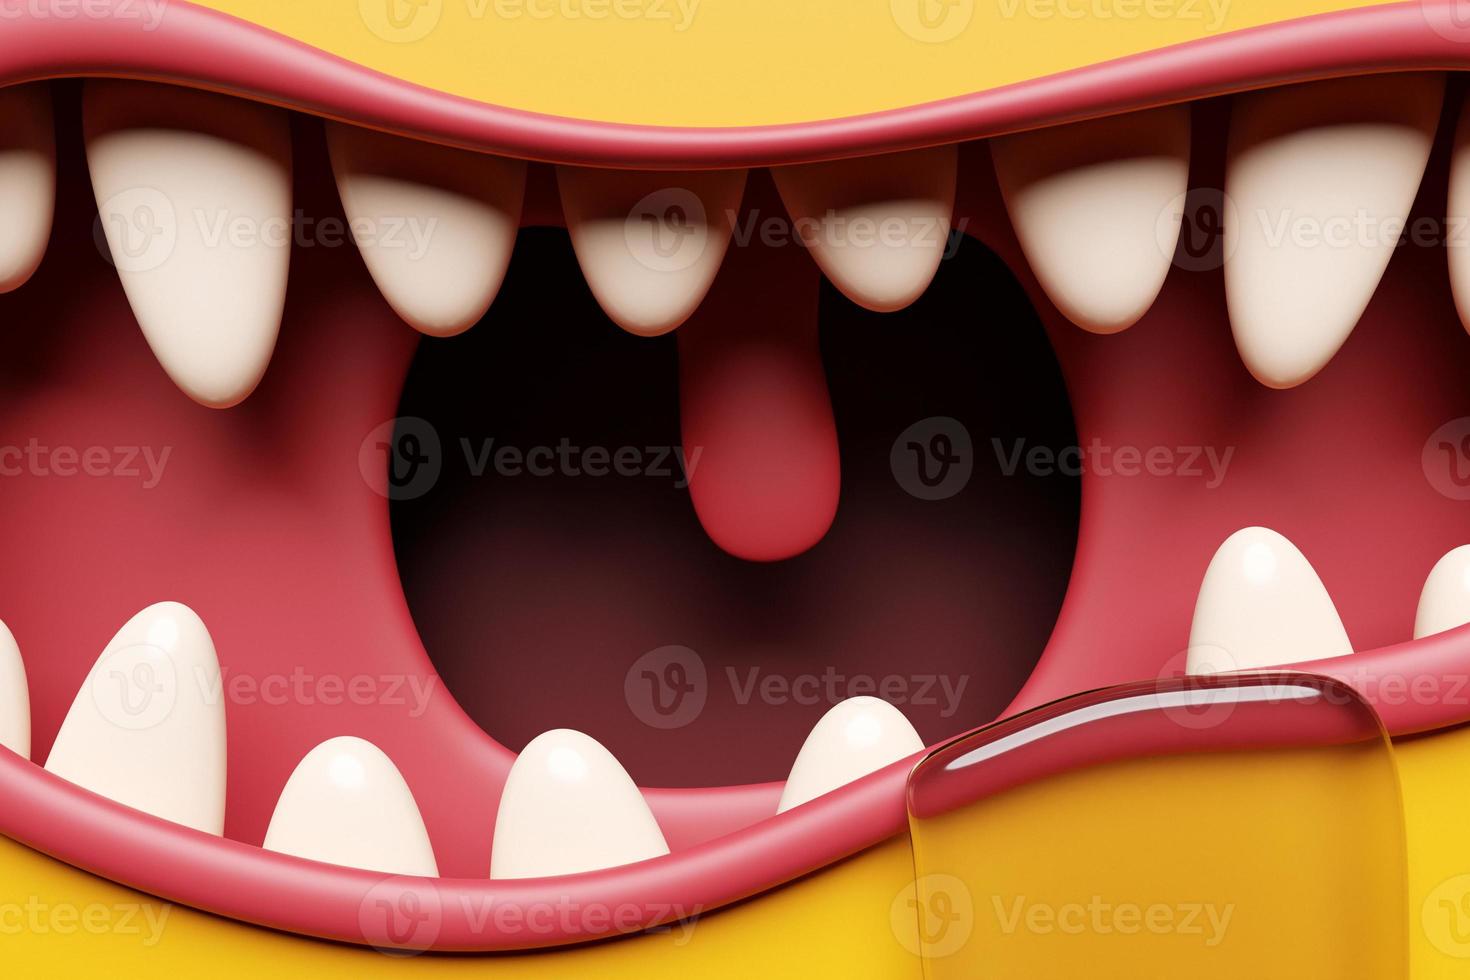 3D illustration fantasy  toothy mouth in bright colors.  Mouth of screaming monster or beast. Angry cartoon face photo